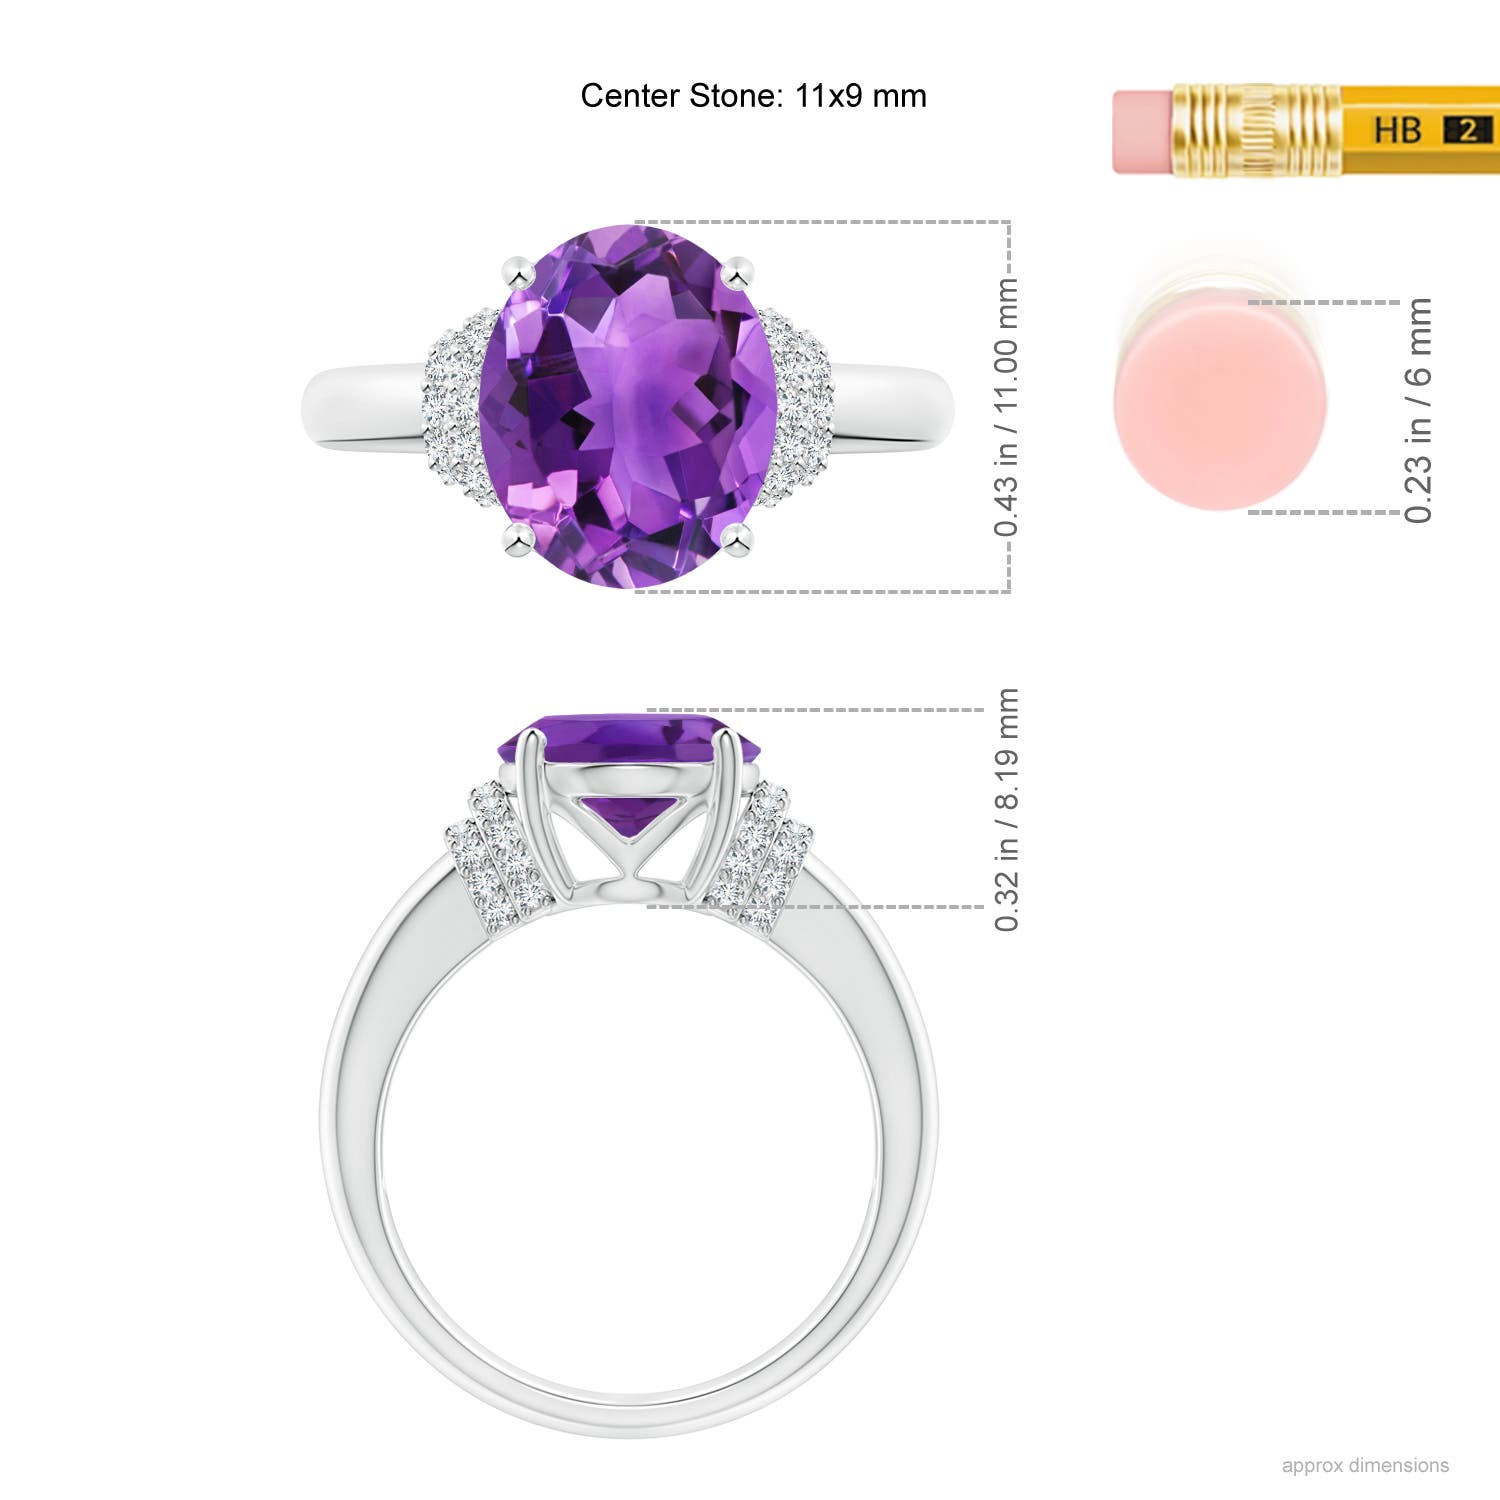 AAA - Amethyst / 3.35 CT / 14 KT White Gold